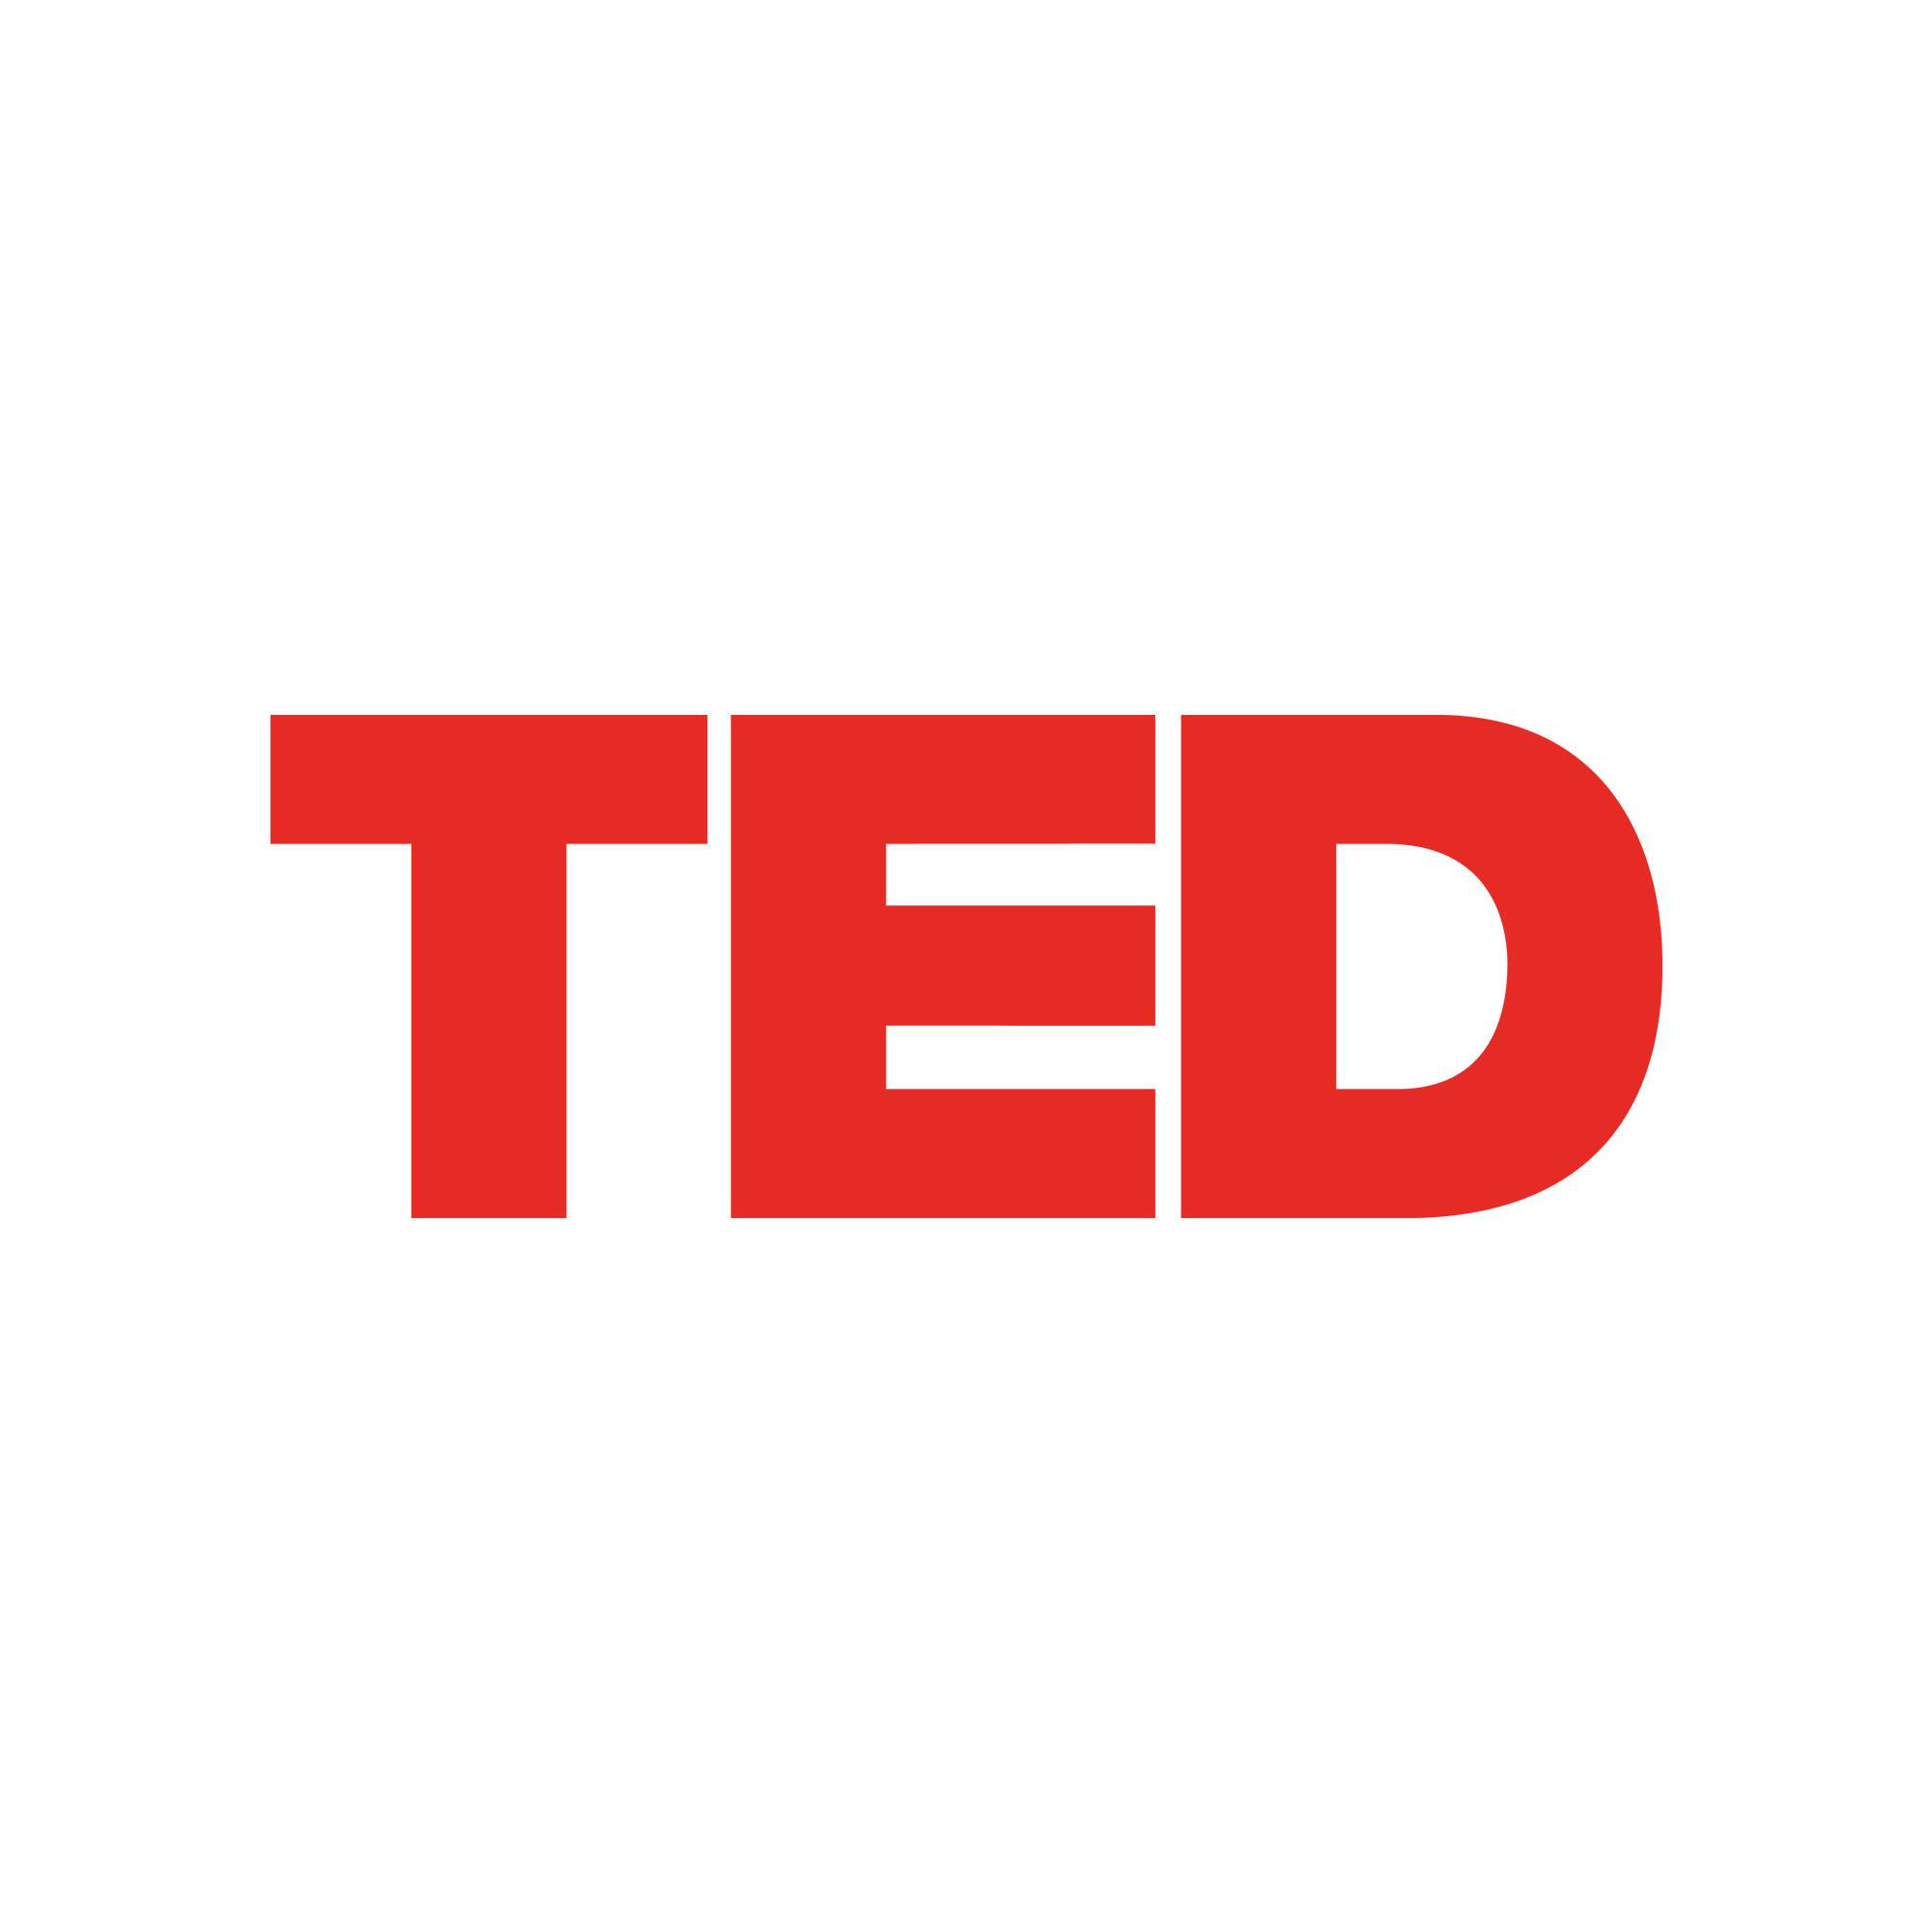 TED Conferences, LLC